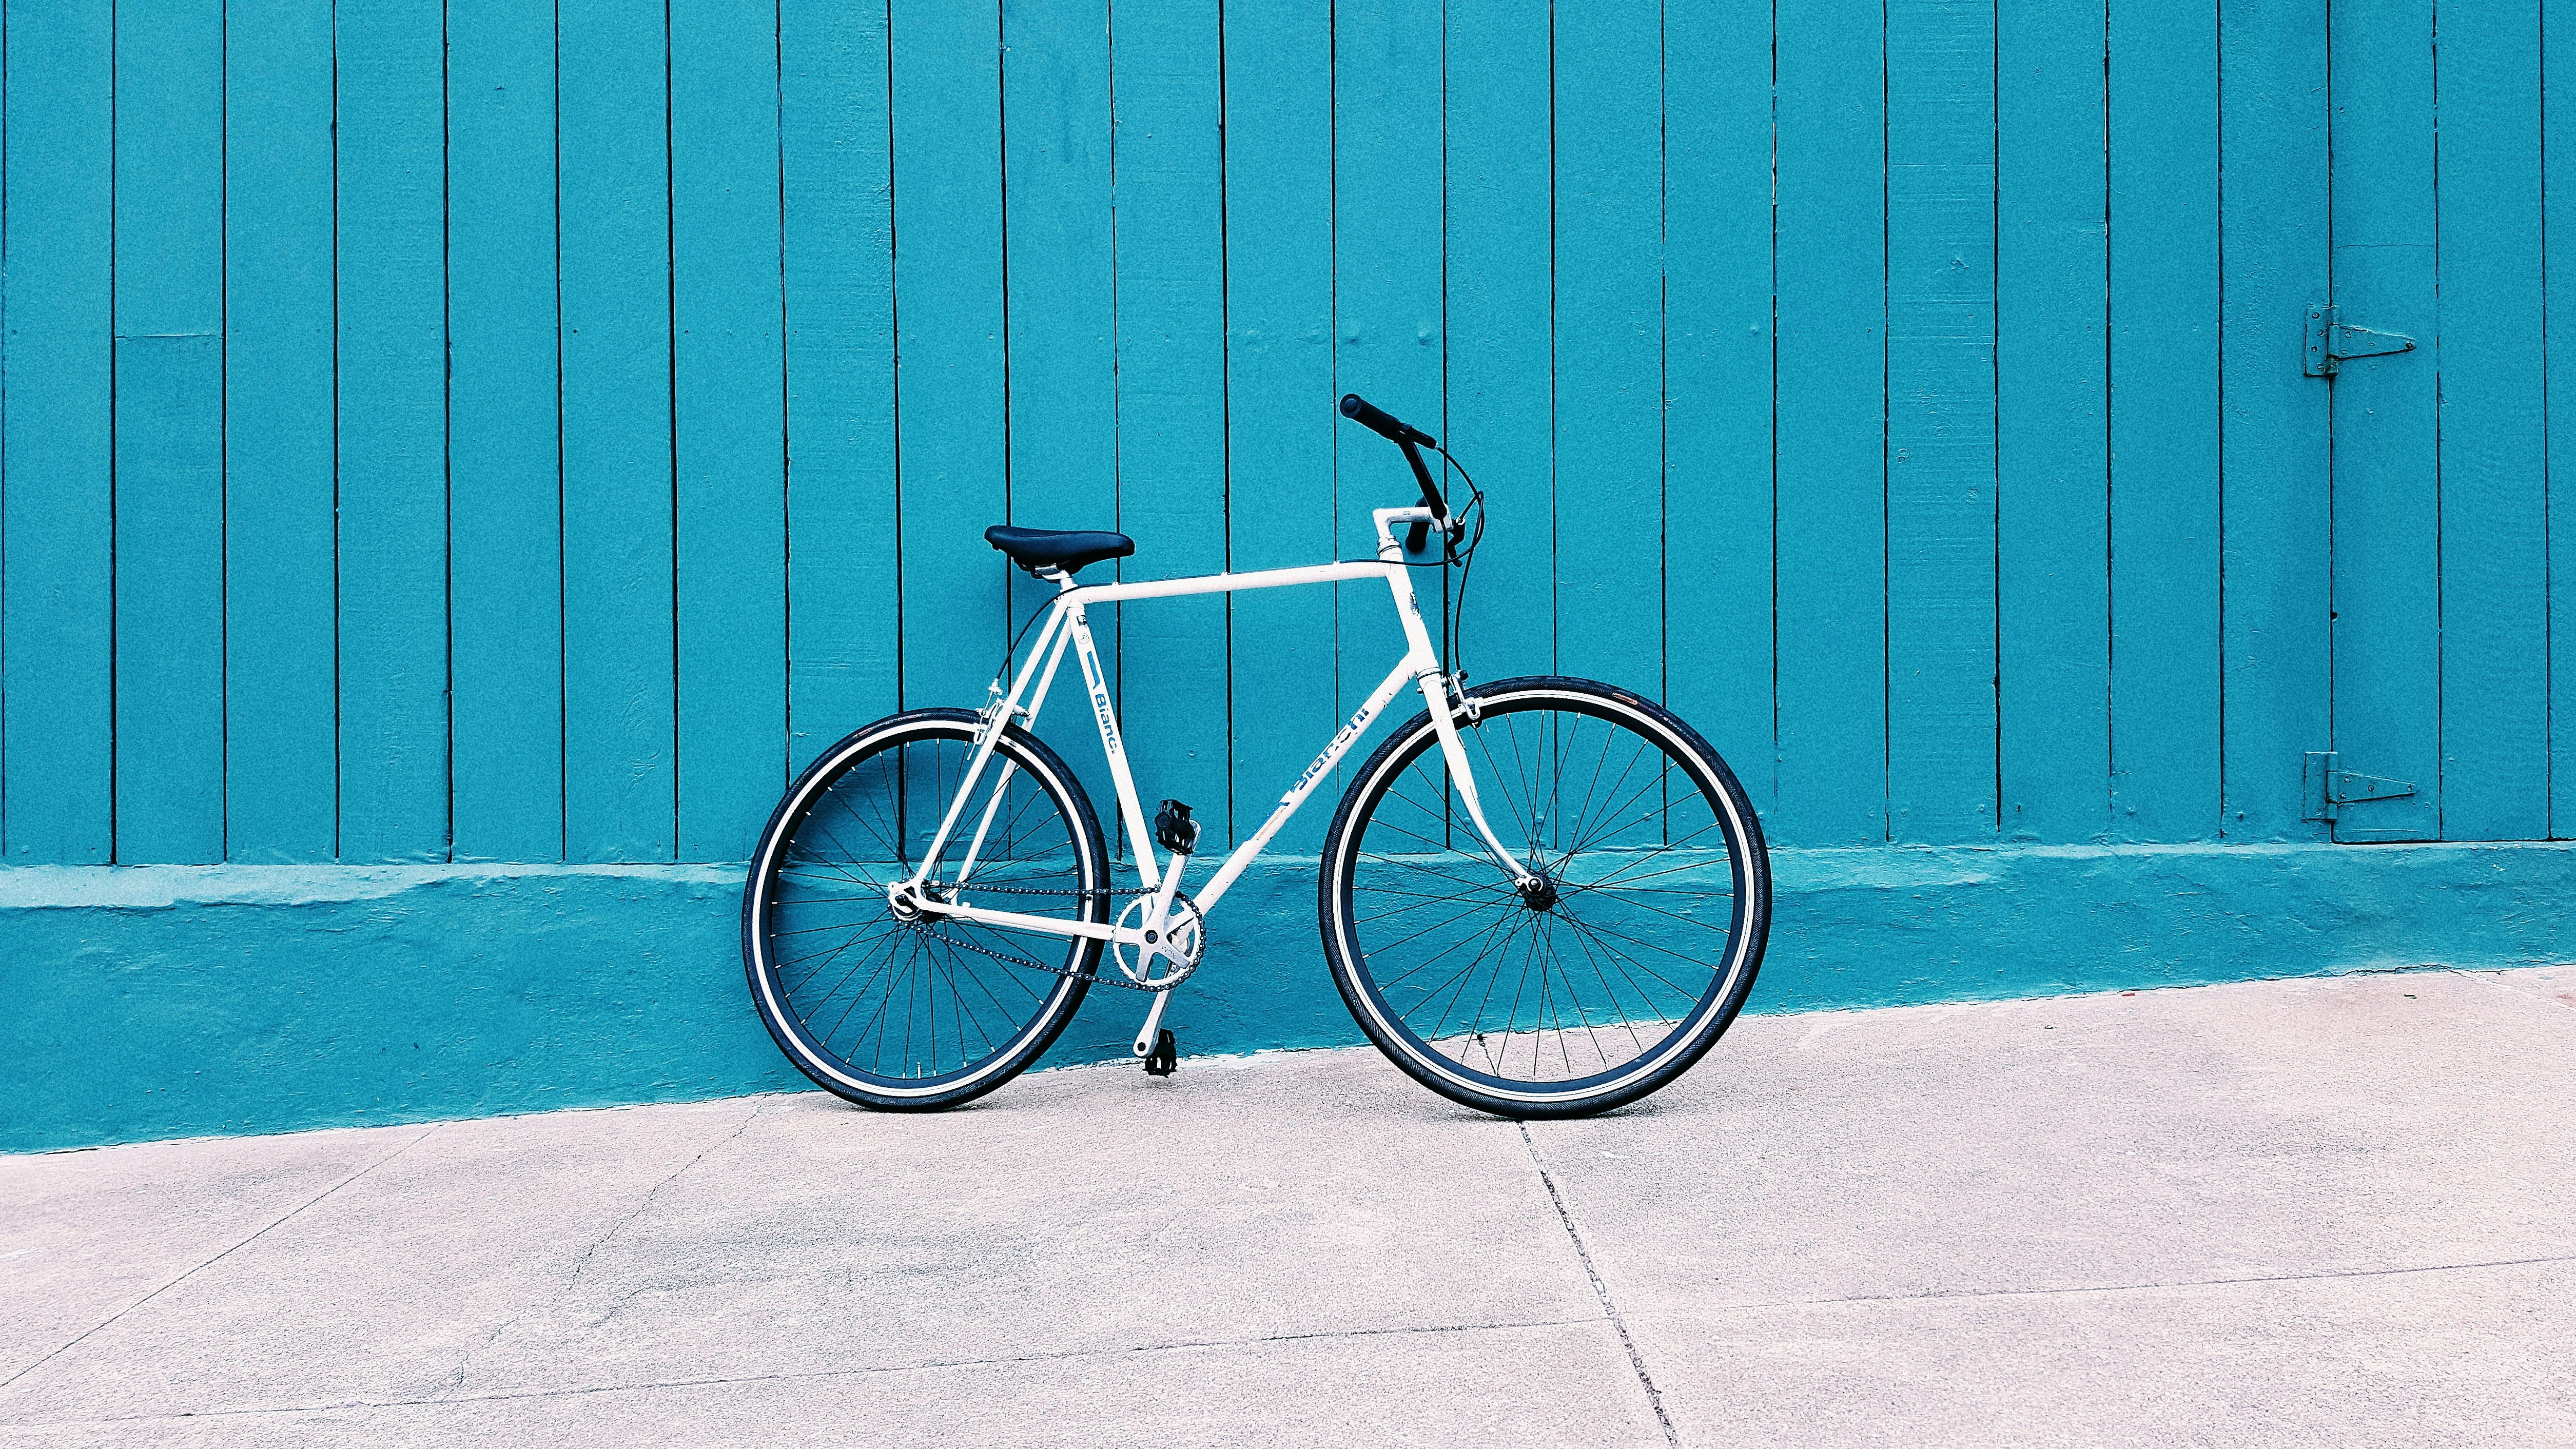 white road bike leaning on teal wooden wall during daytime